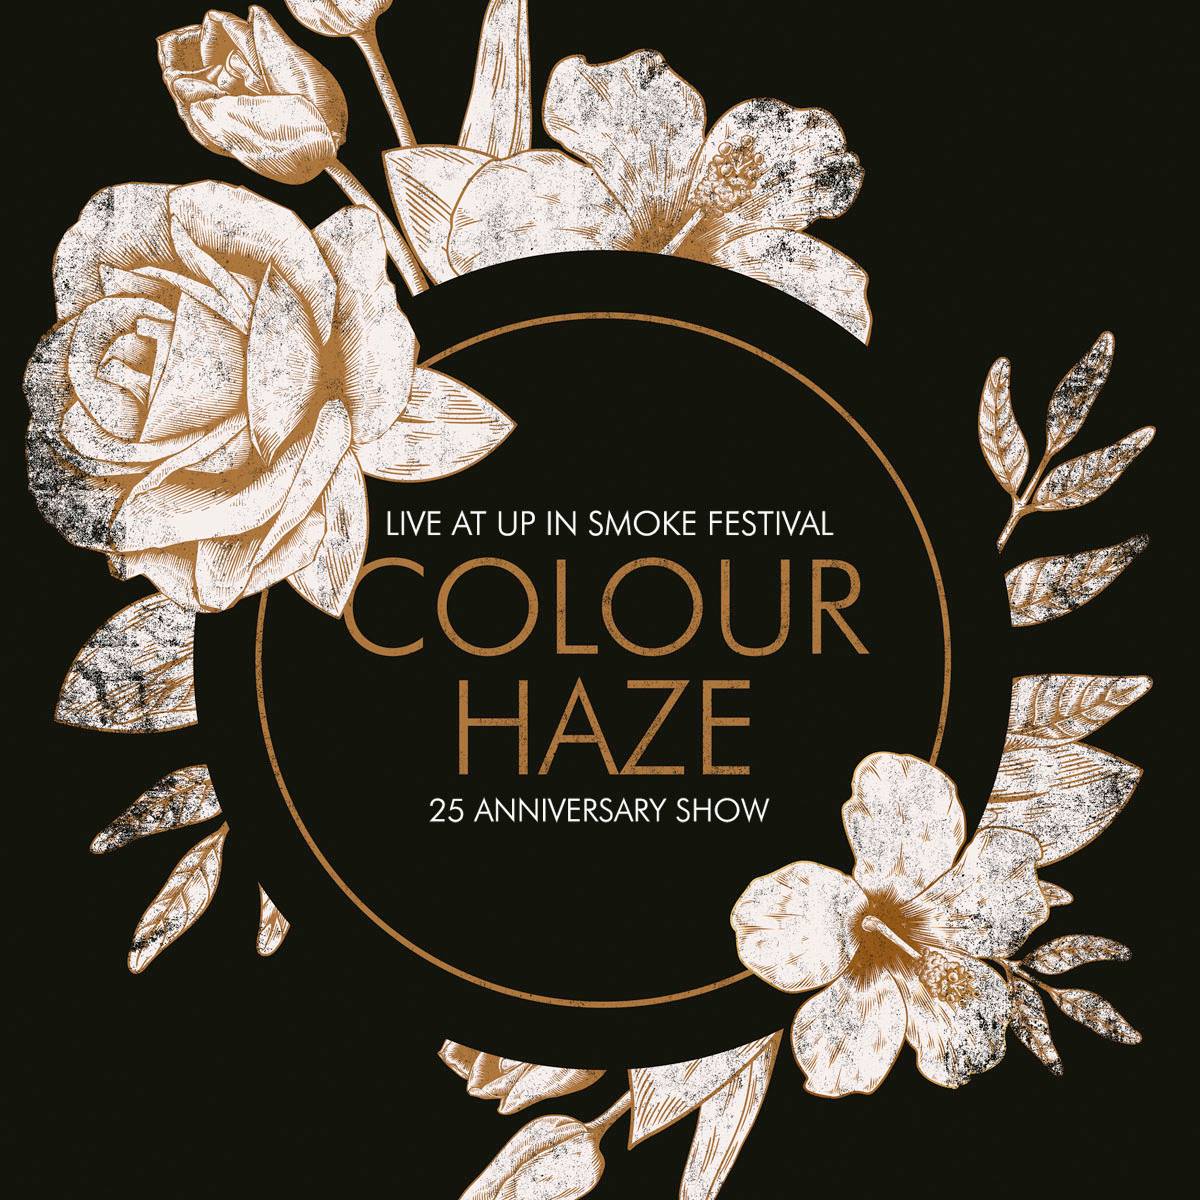 Colour Haze Confirmed for Up in Smoke 2019